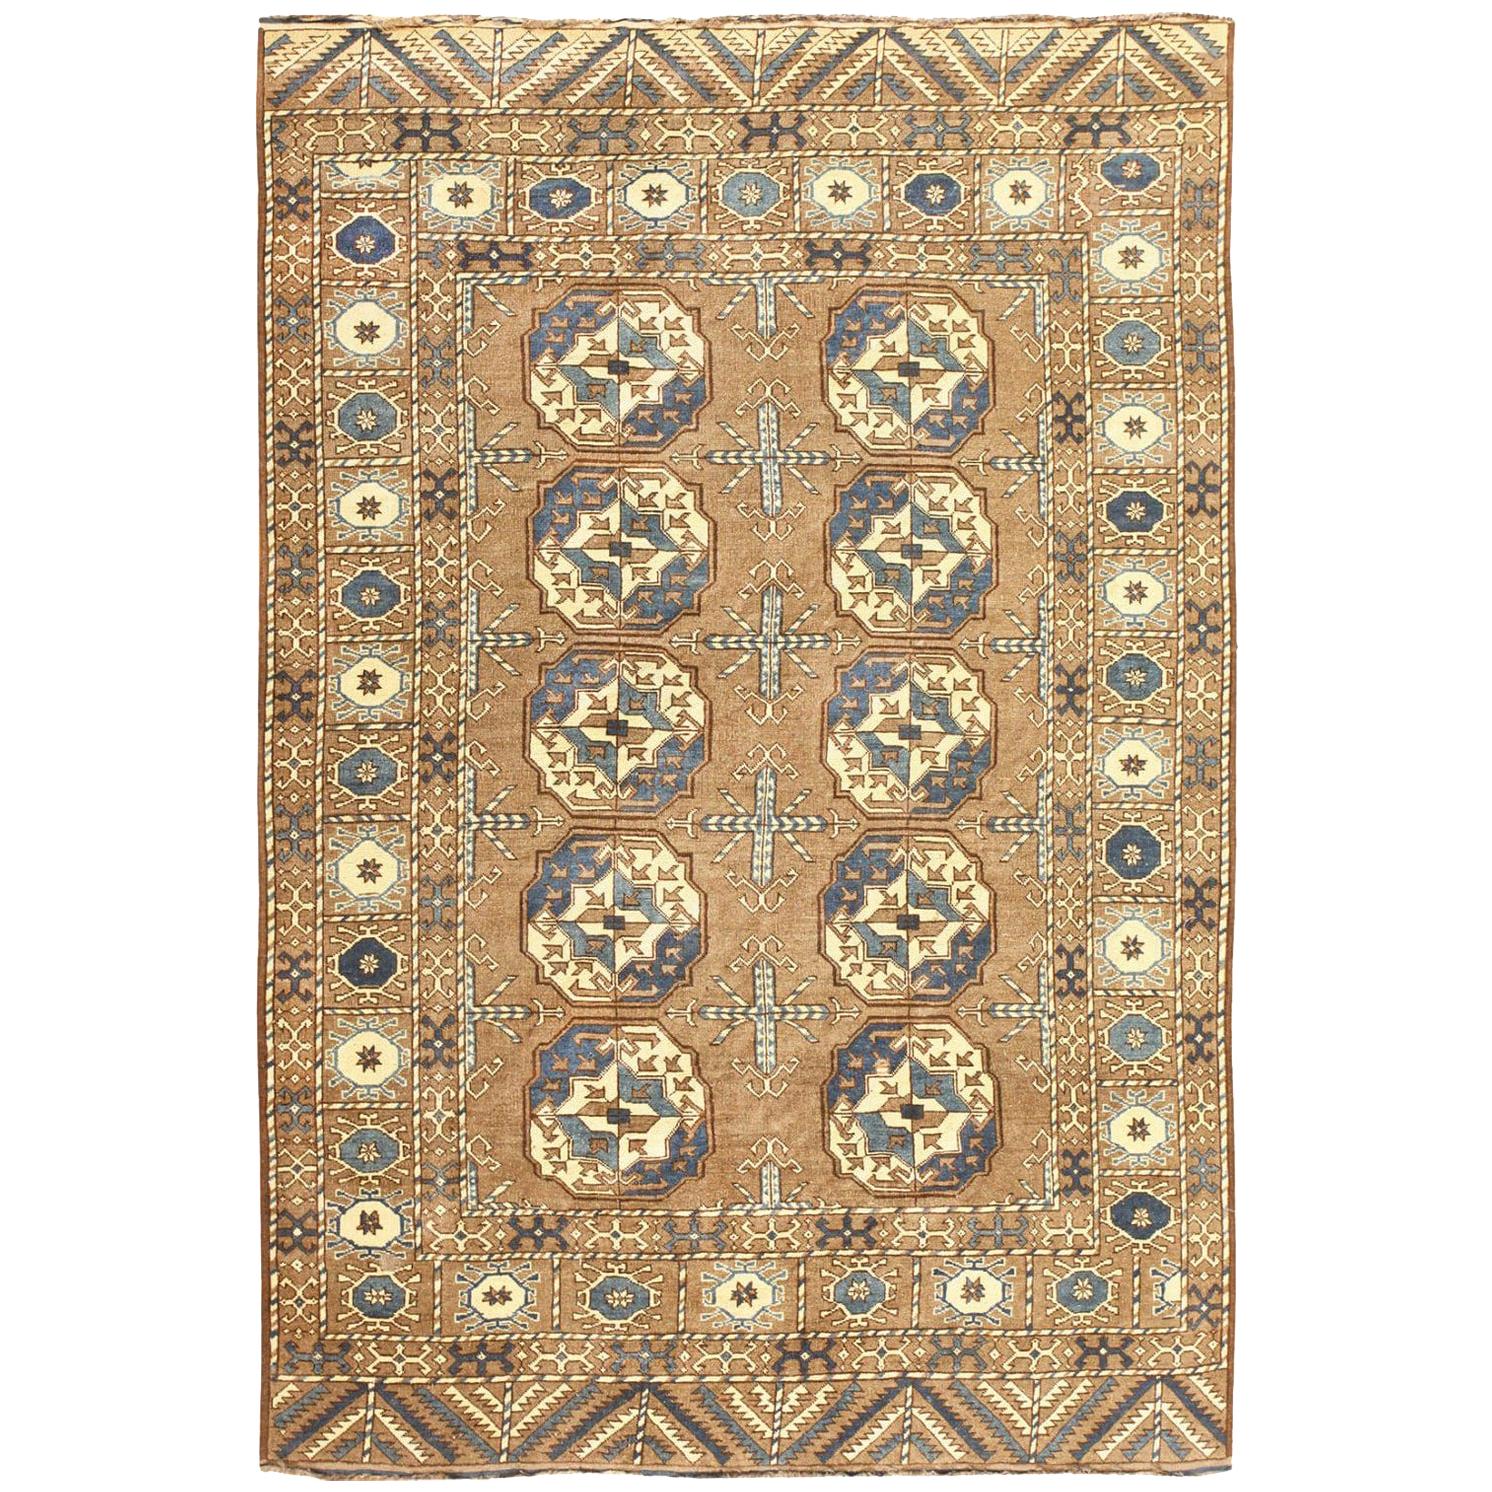 Beautiful Earthtone Antique Afghan Rug. Size: 6 ft 7 in x 9 ft 7 in